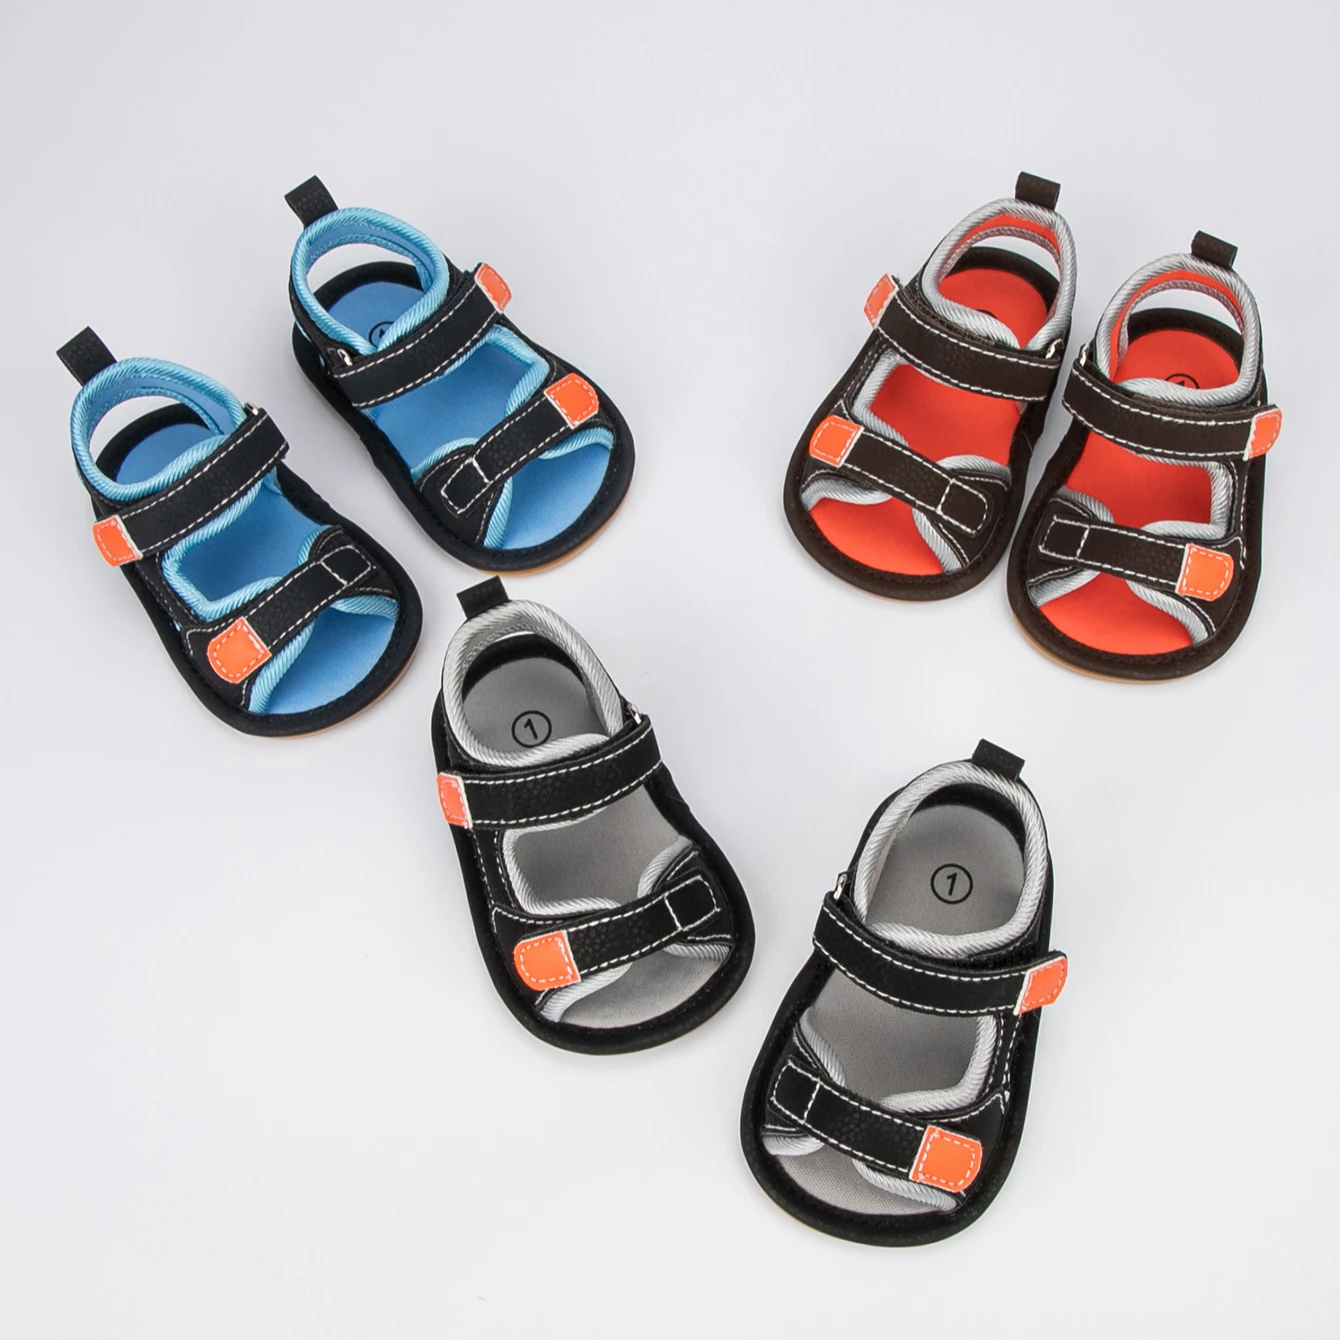 

New arrival summer rubber soft sole Casual commfortable 0 18 months infant baby boysummer baby sandals, Blue,grey,orange